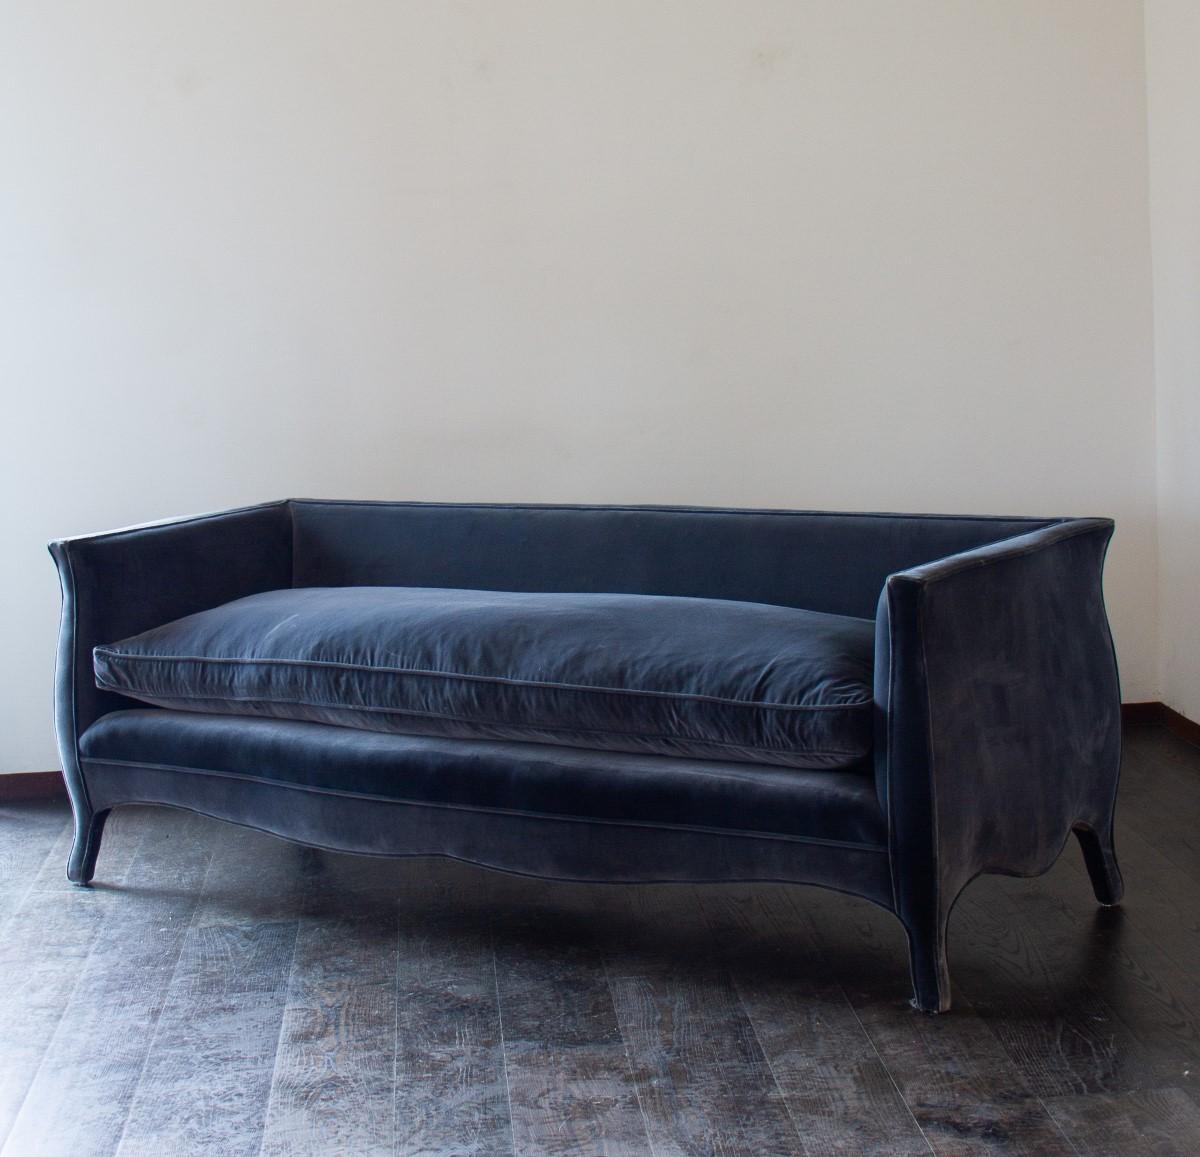 A bespoke made, French style sofa, upholstered in a carbon blue colored velvet.

This sofa was designed by Ken Bolan and made in UK workshops. The design is based on a French style with sweeping curves and upholstered in a luxurious velvet. Made